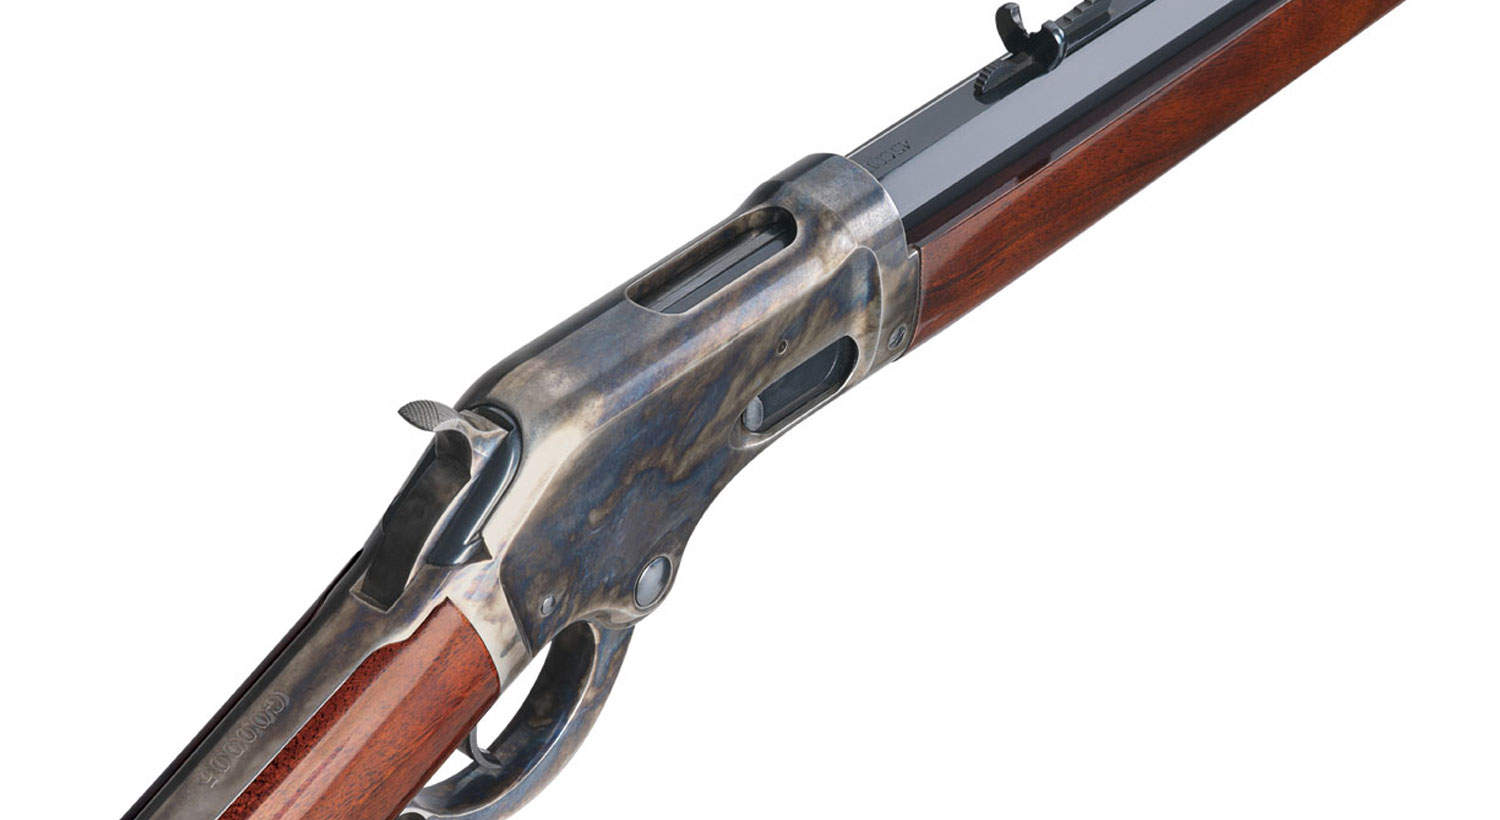 1883 BURGESS LEVER ACTION RIFLE & CARBINE Uberti Replicas Top quality f...